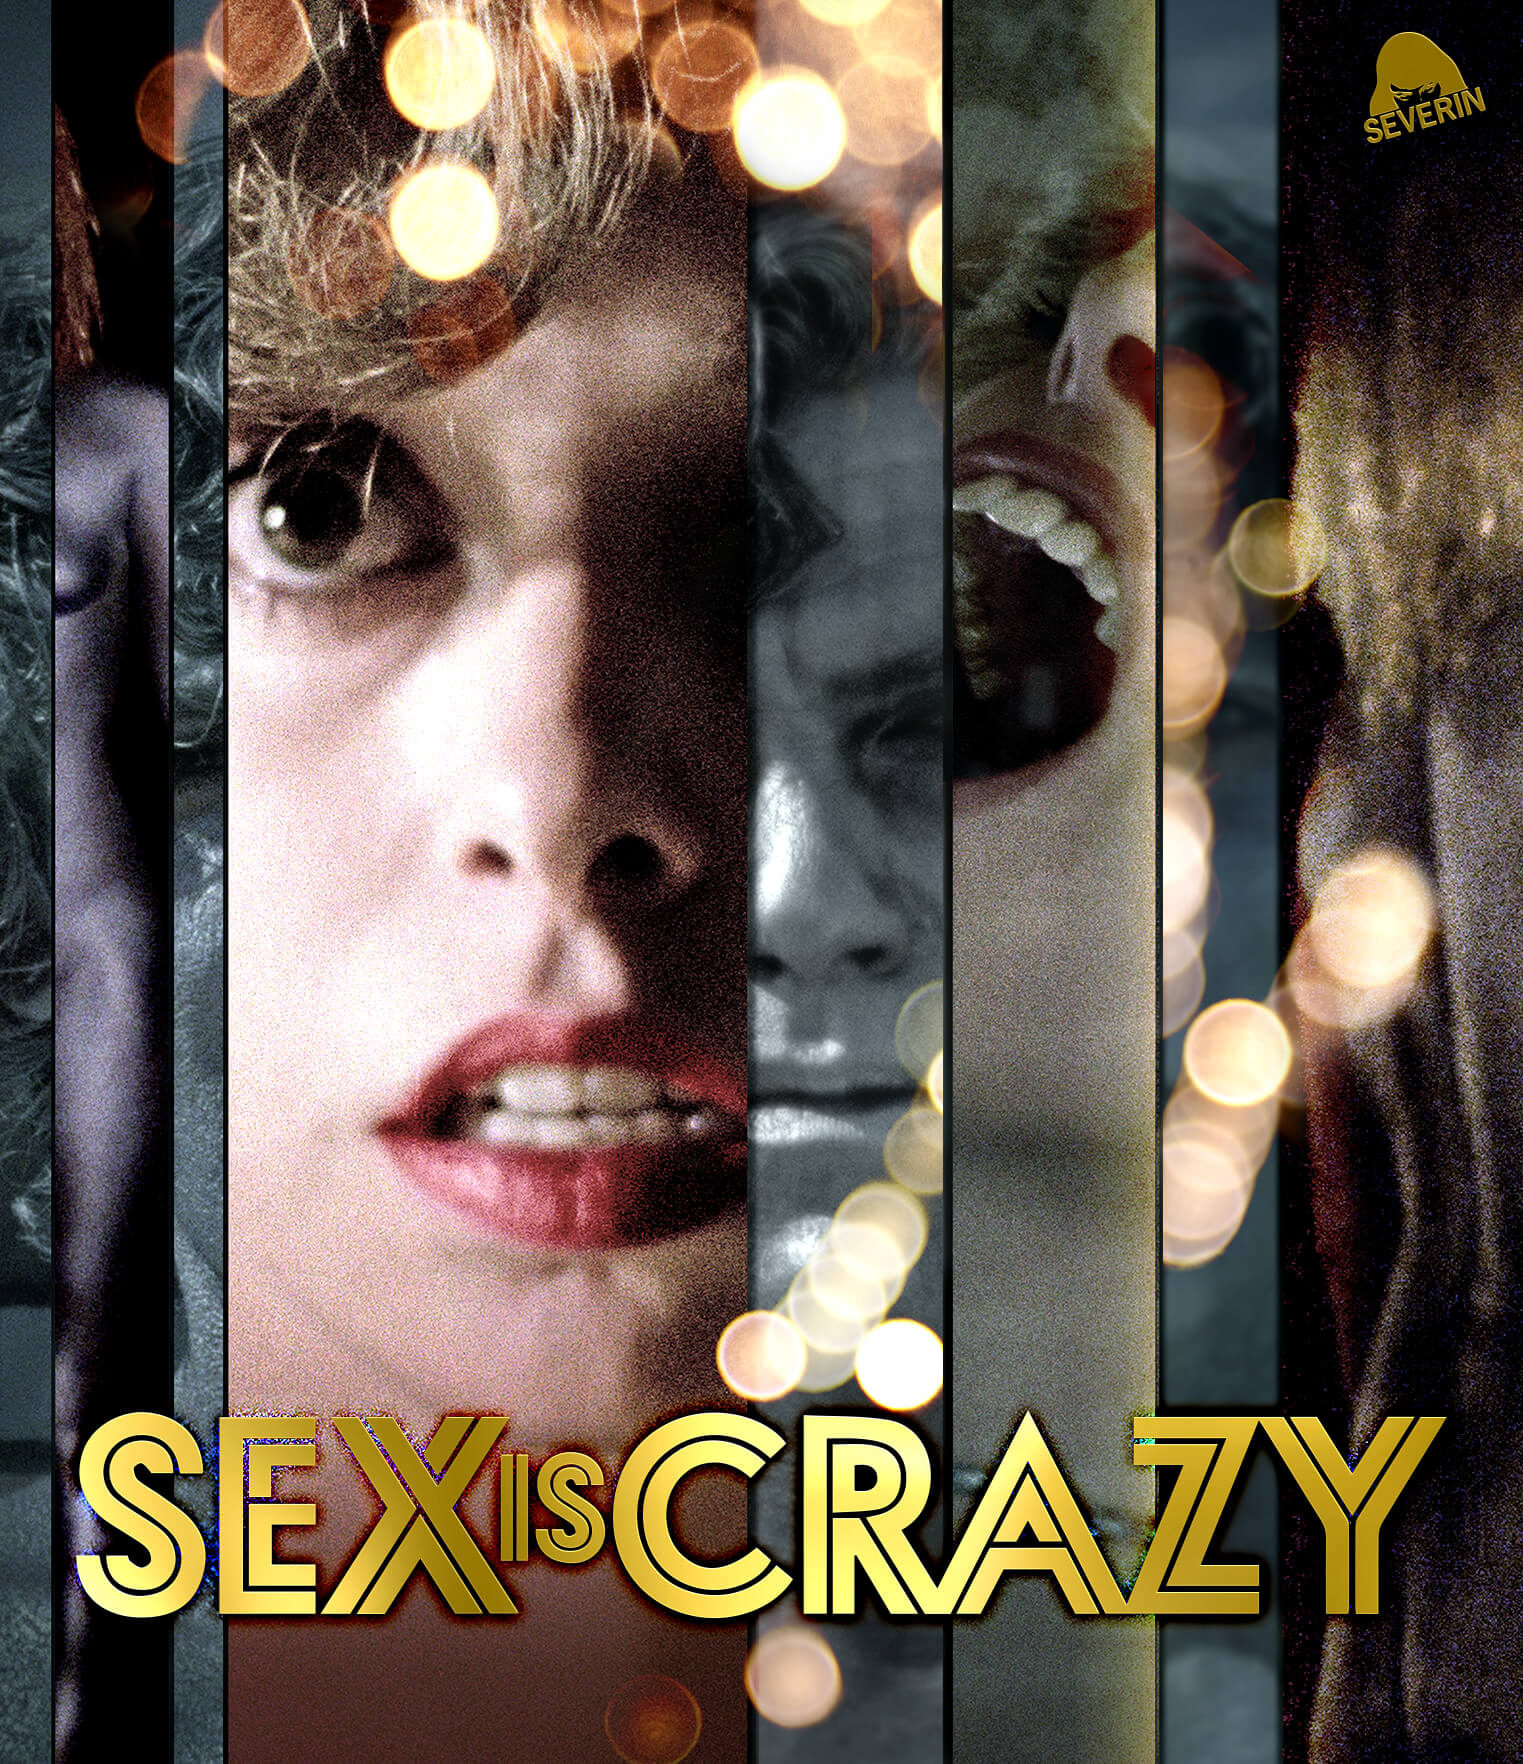 SEX IS CRAZY BLU-RAY